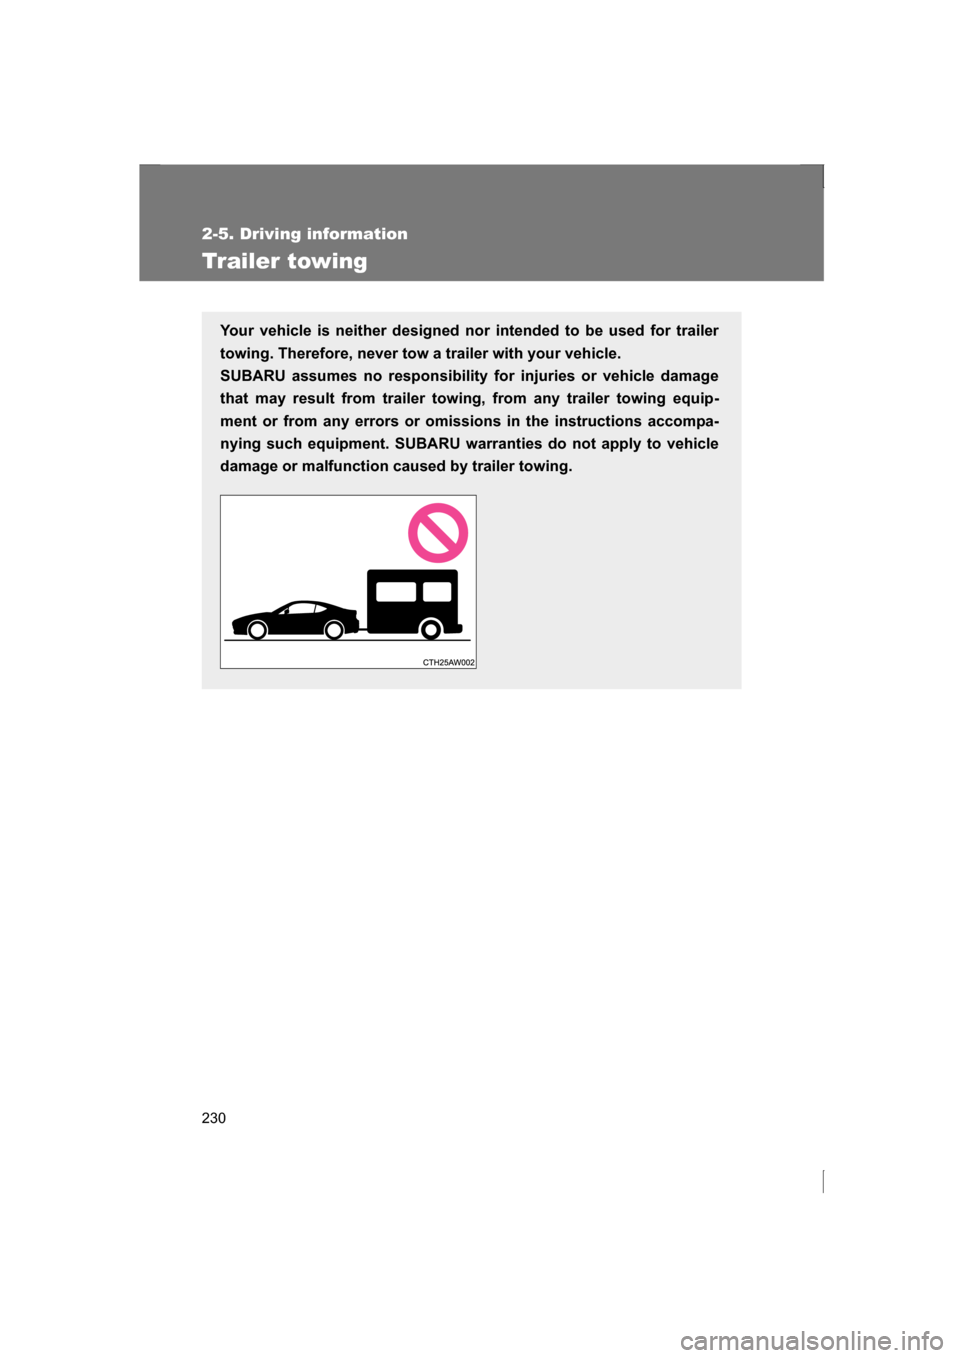 SUBARU BRZ 2013 1.G User Guide 230
2-5. Driving information
Trailer towing
Your vehicle is neither designed nor intended to be used for trailer 
towing. Therefore, never tow a trailer with your vehicle. 
SUBARU assumes no responsib